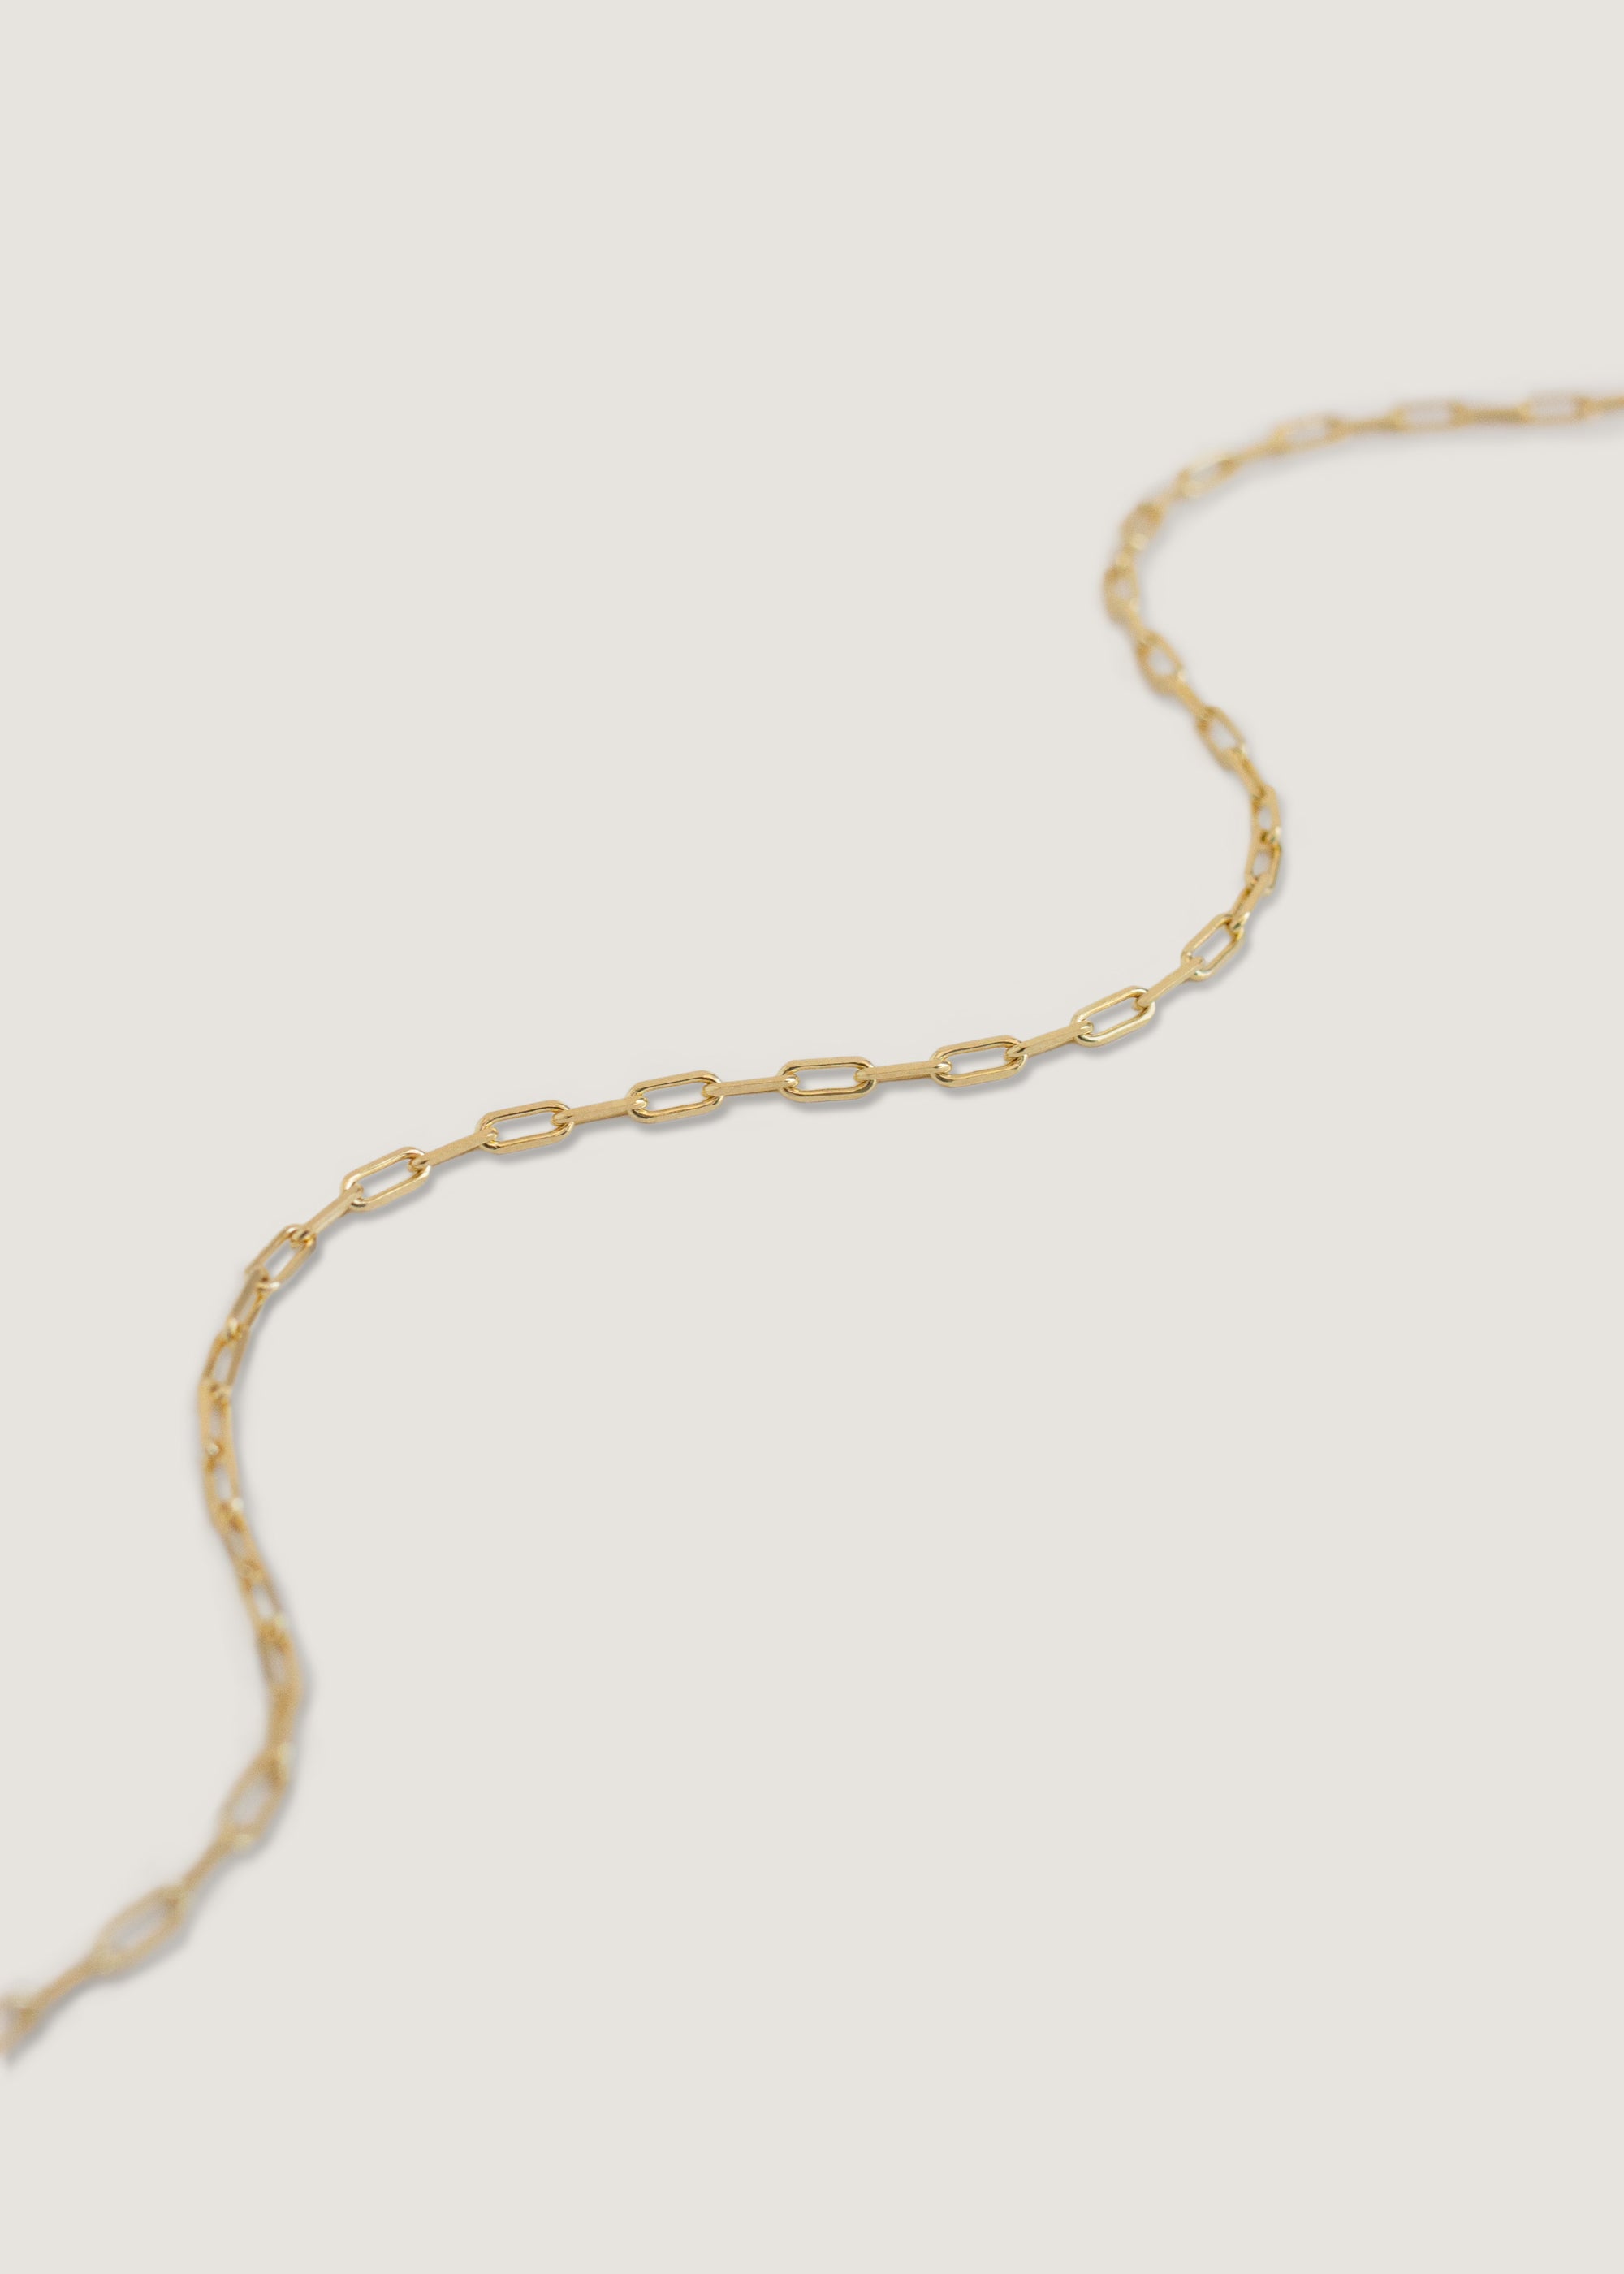 alt="Micro Link Chain Anklet"